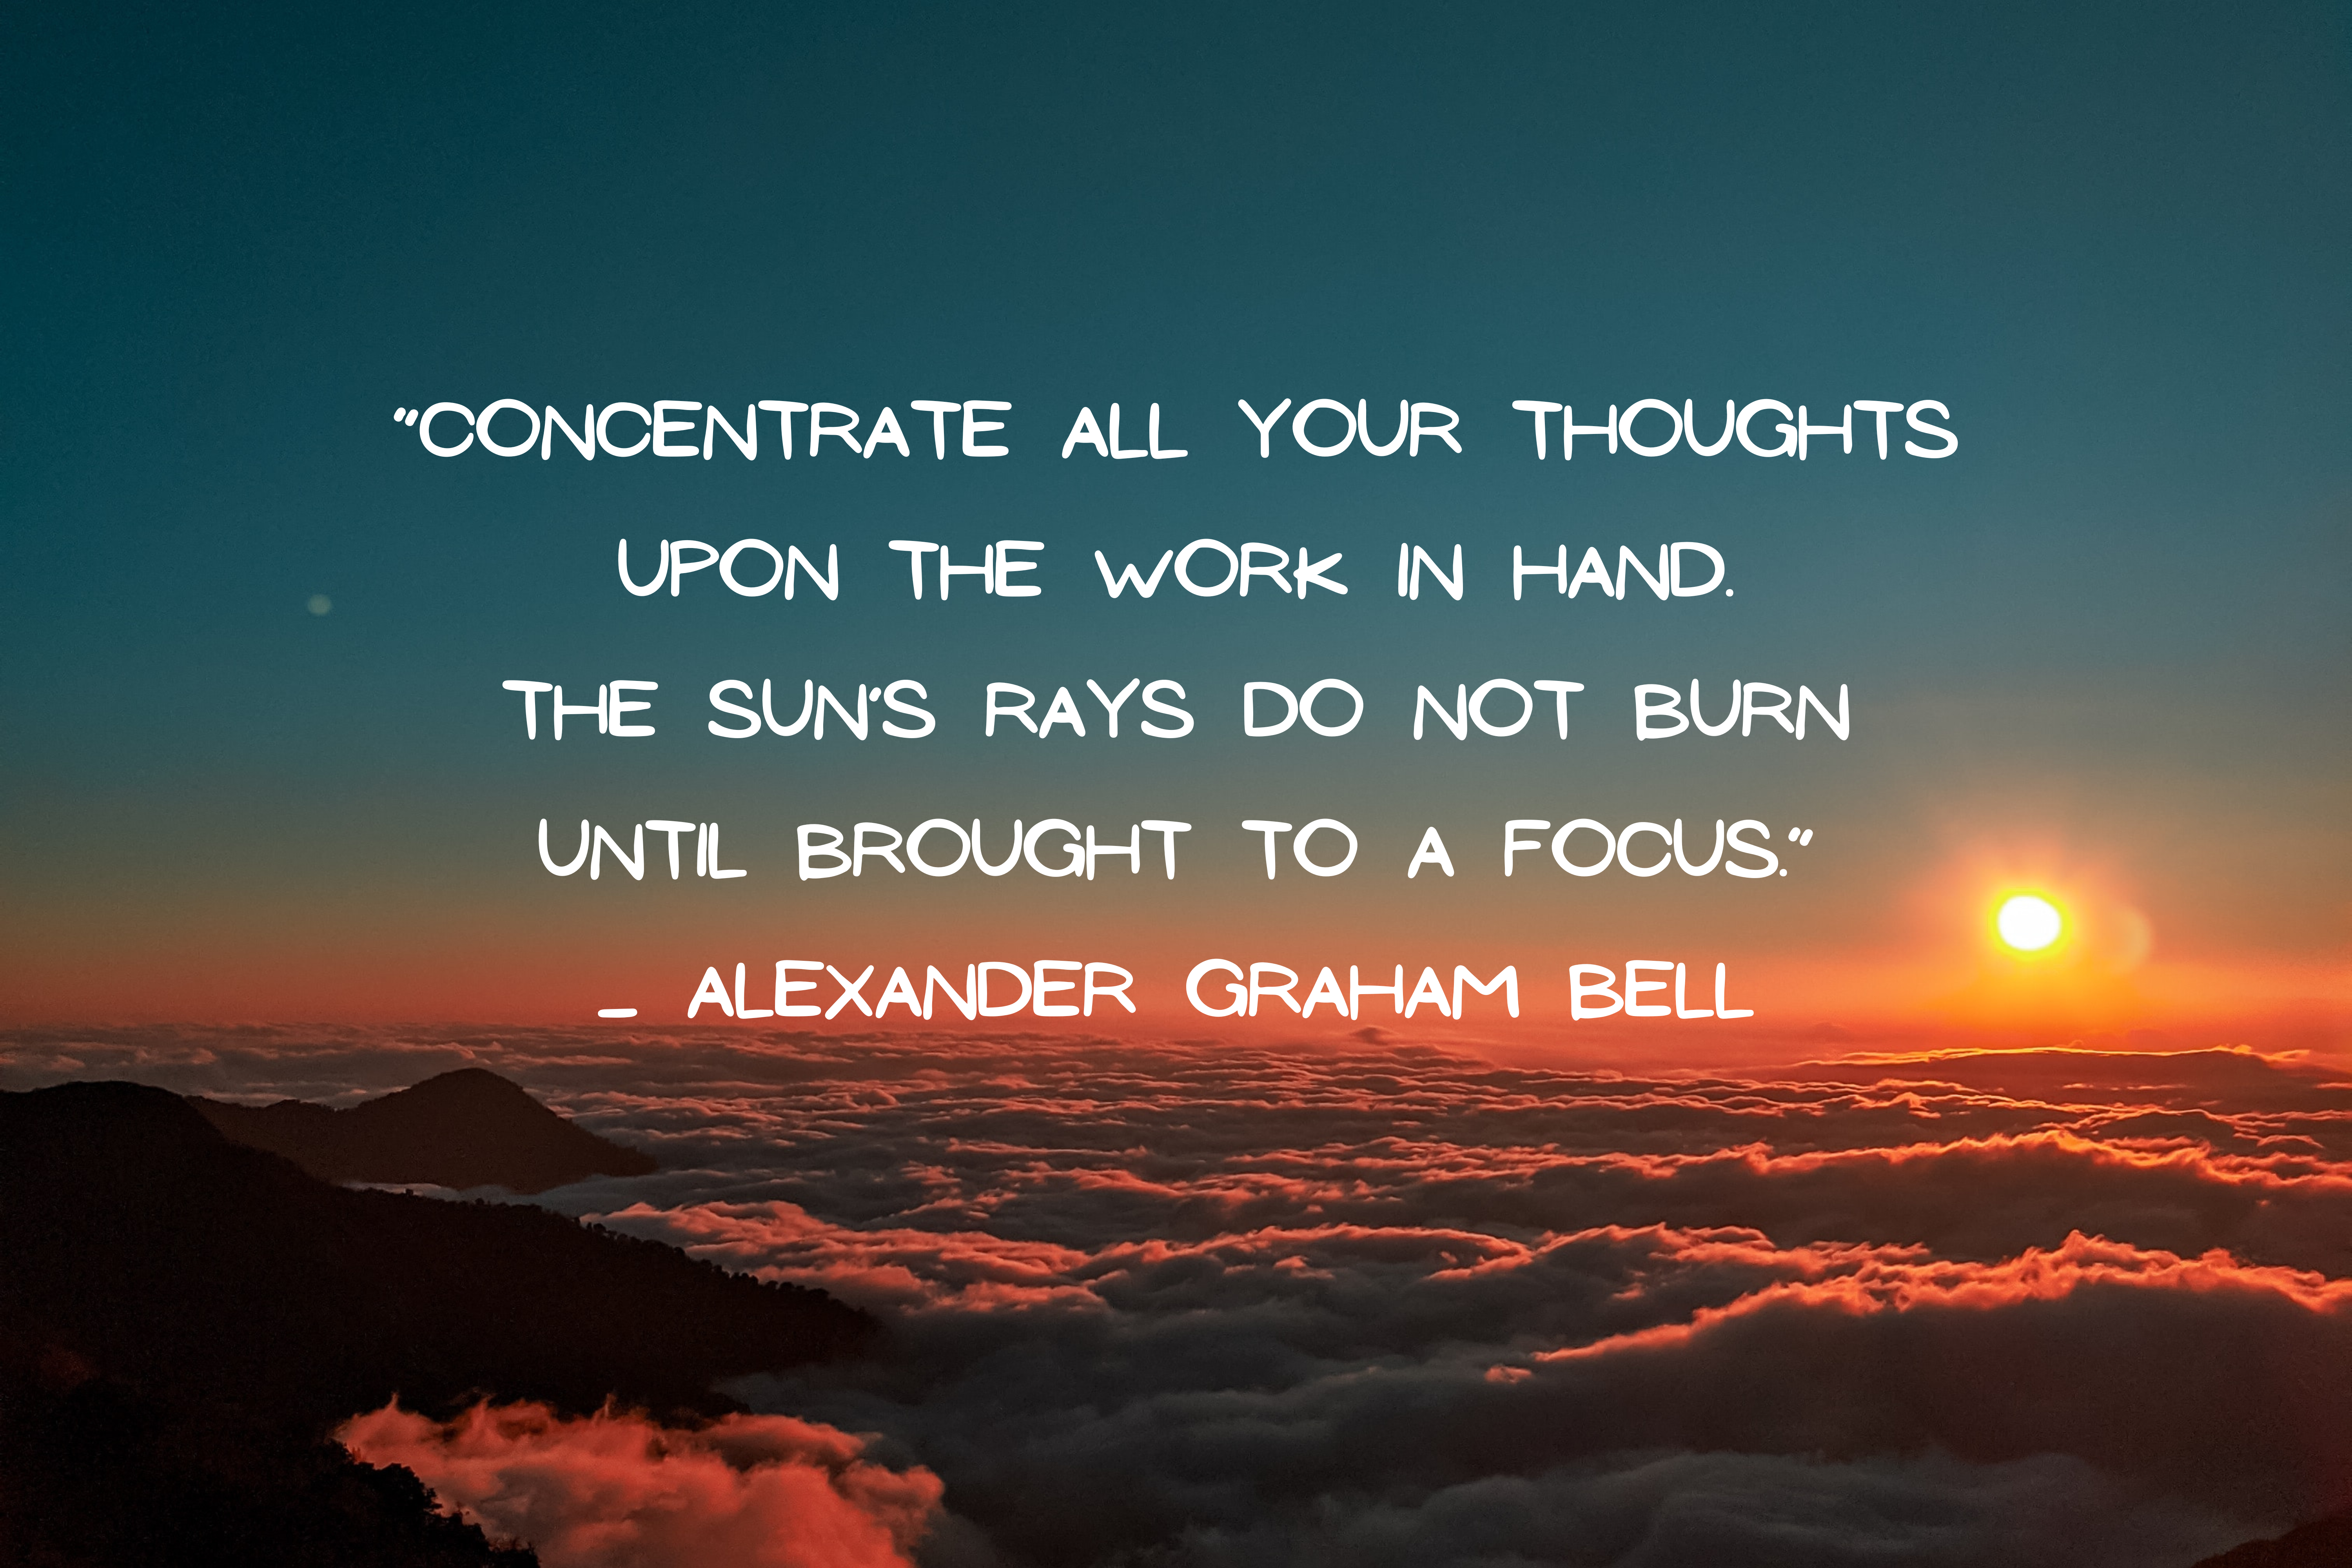 Concentrate all your thoughts upon the work in hand. The sun’s rays do not burn until brought to a focus - Hope and Belief.